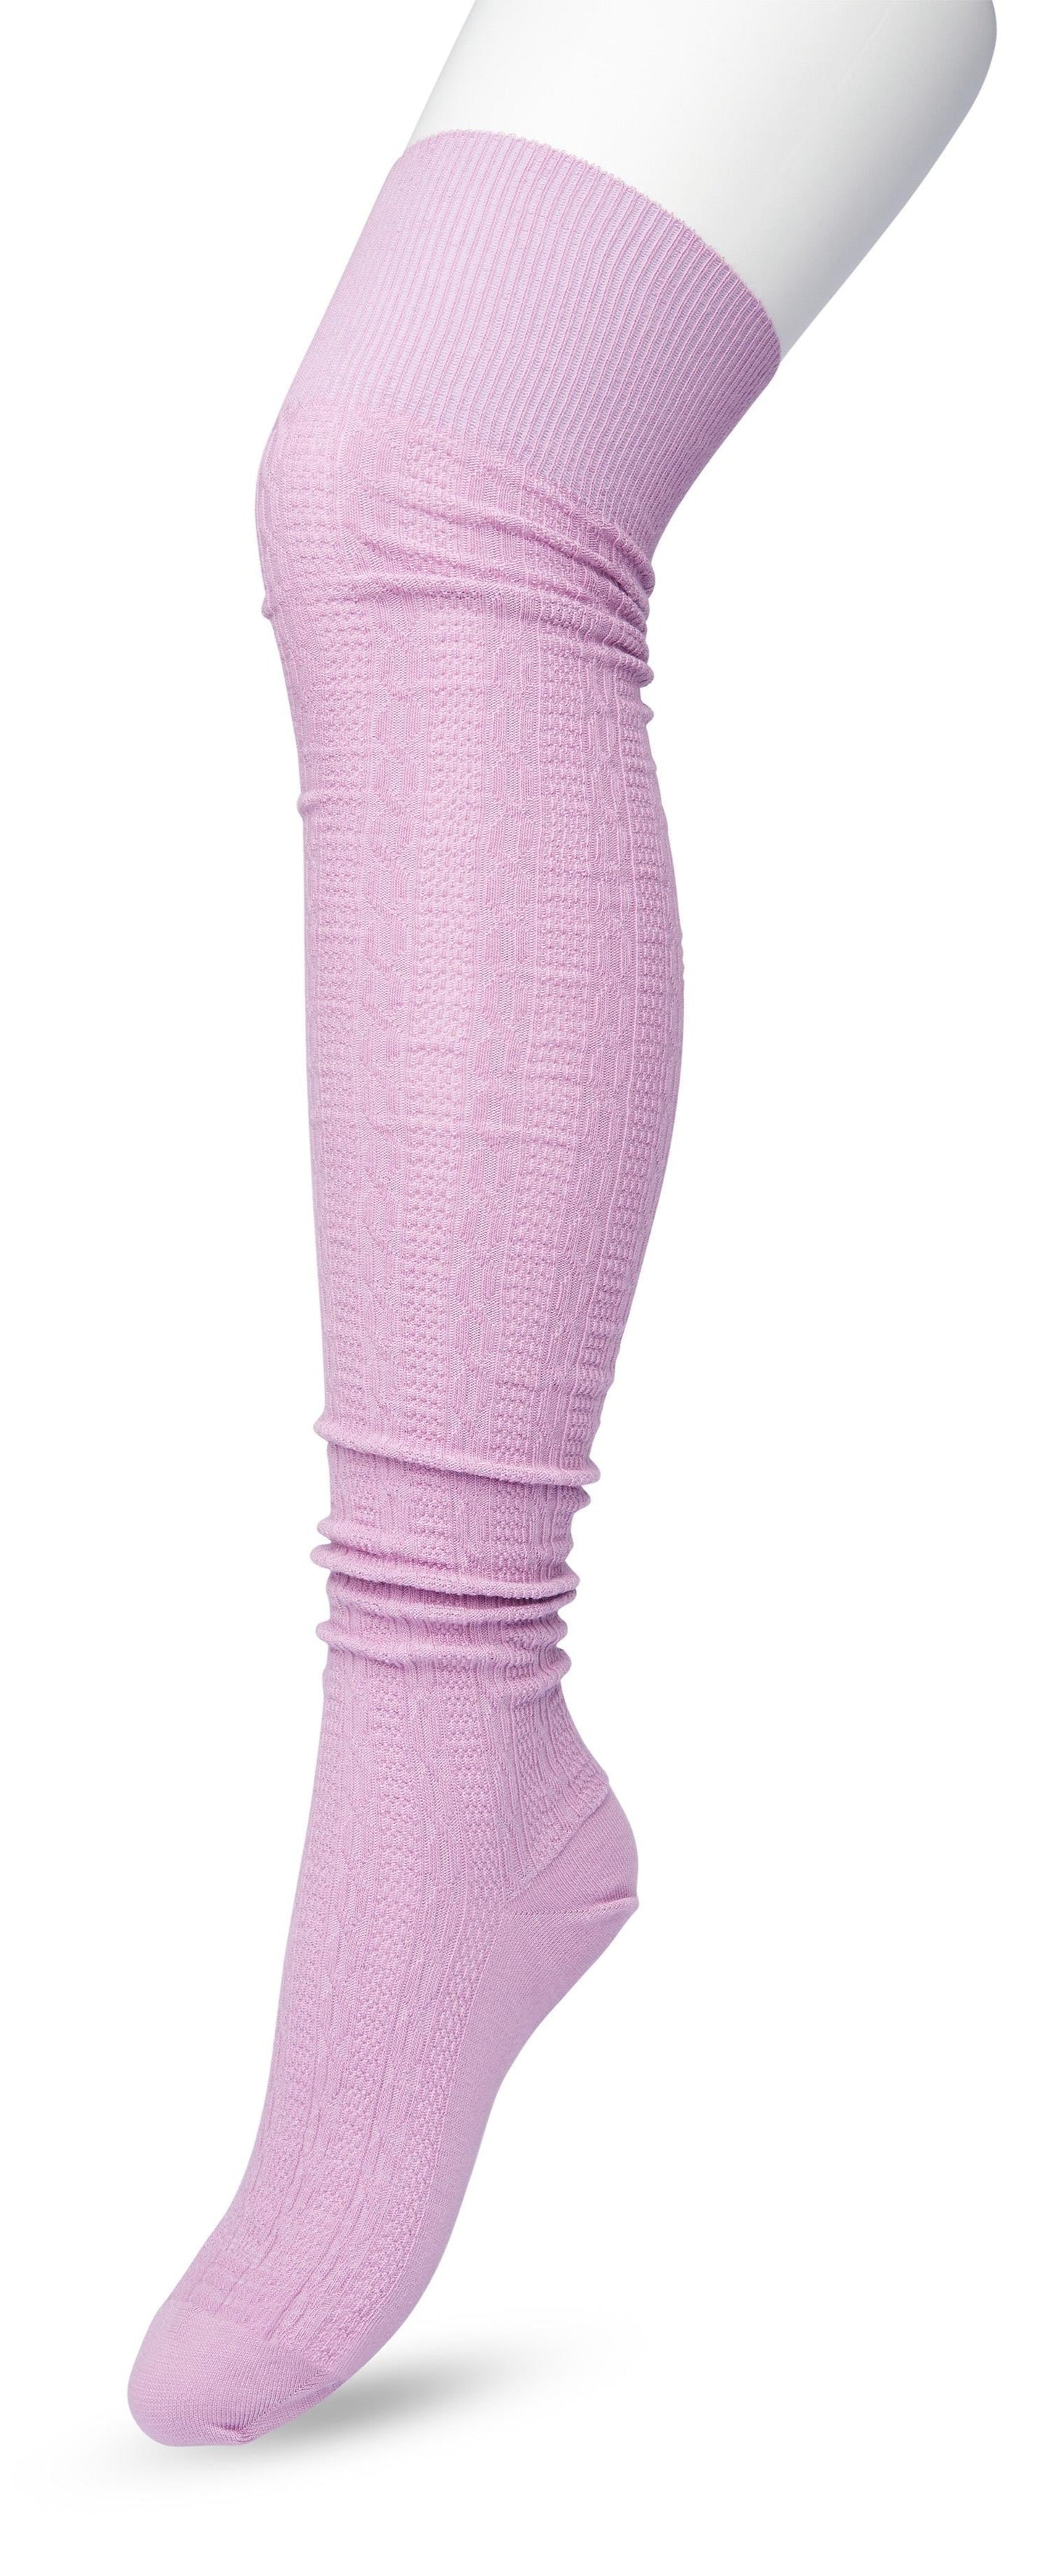 Bonnie Doon Cable Over-Knee Sock - Lilac (lavender mist) cotton knitted over the knee socks with a cable knit style ribbed pattern 